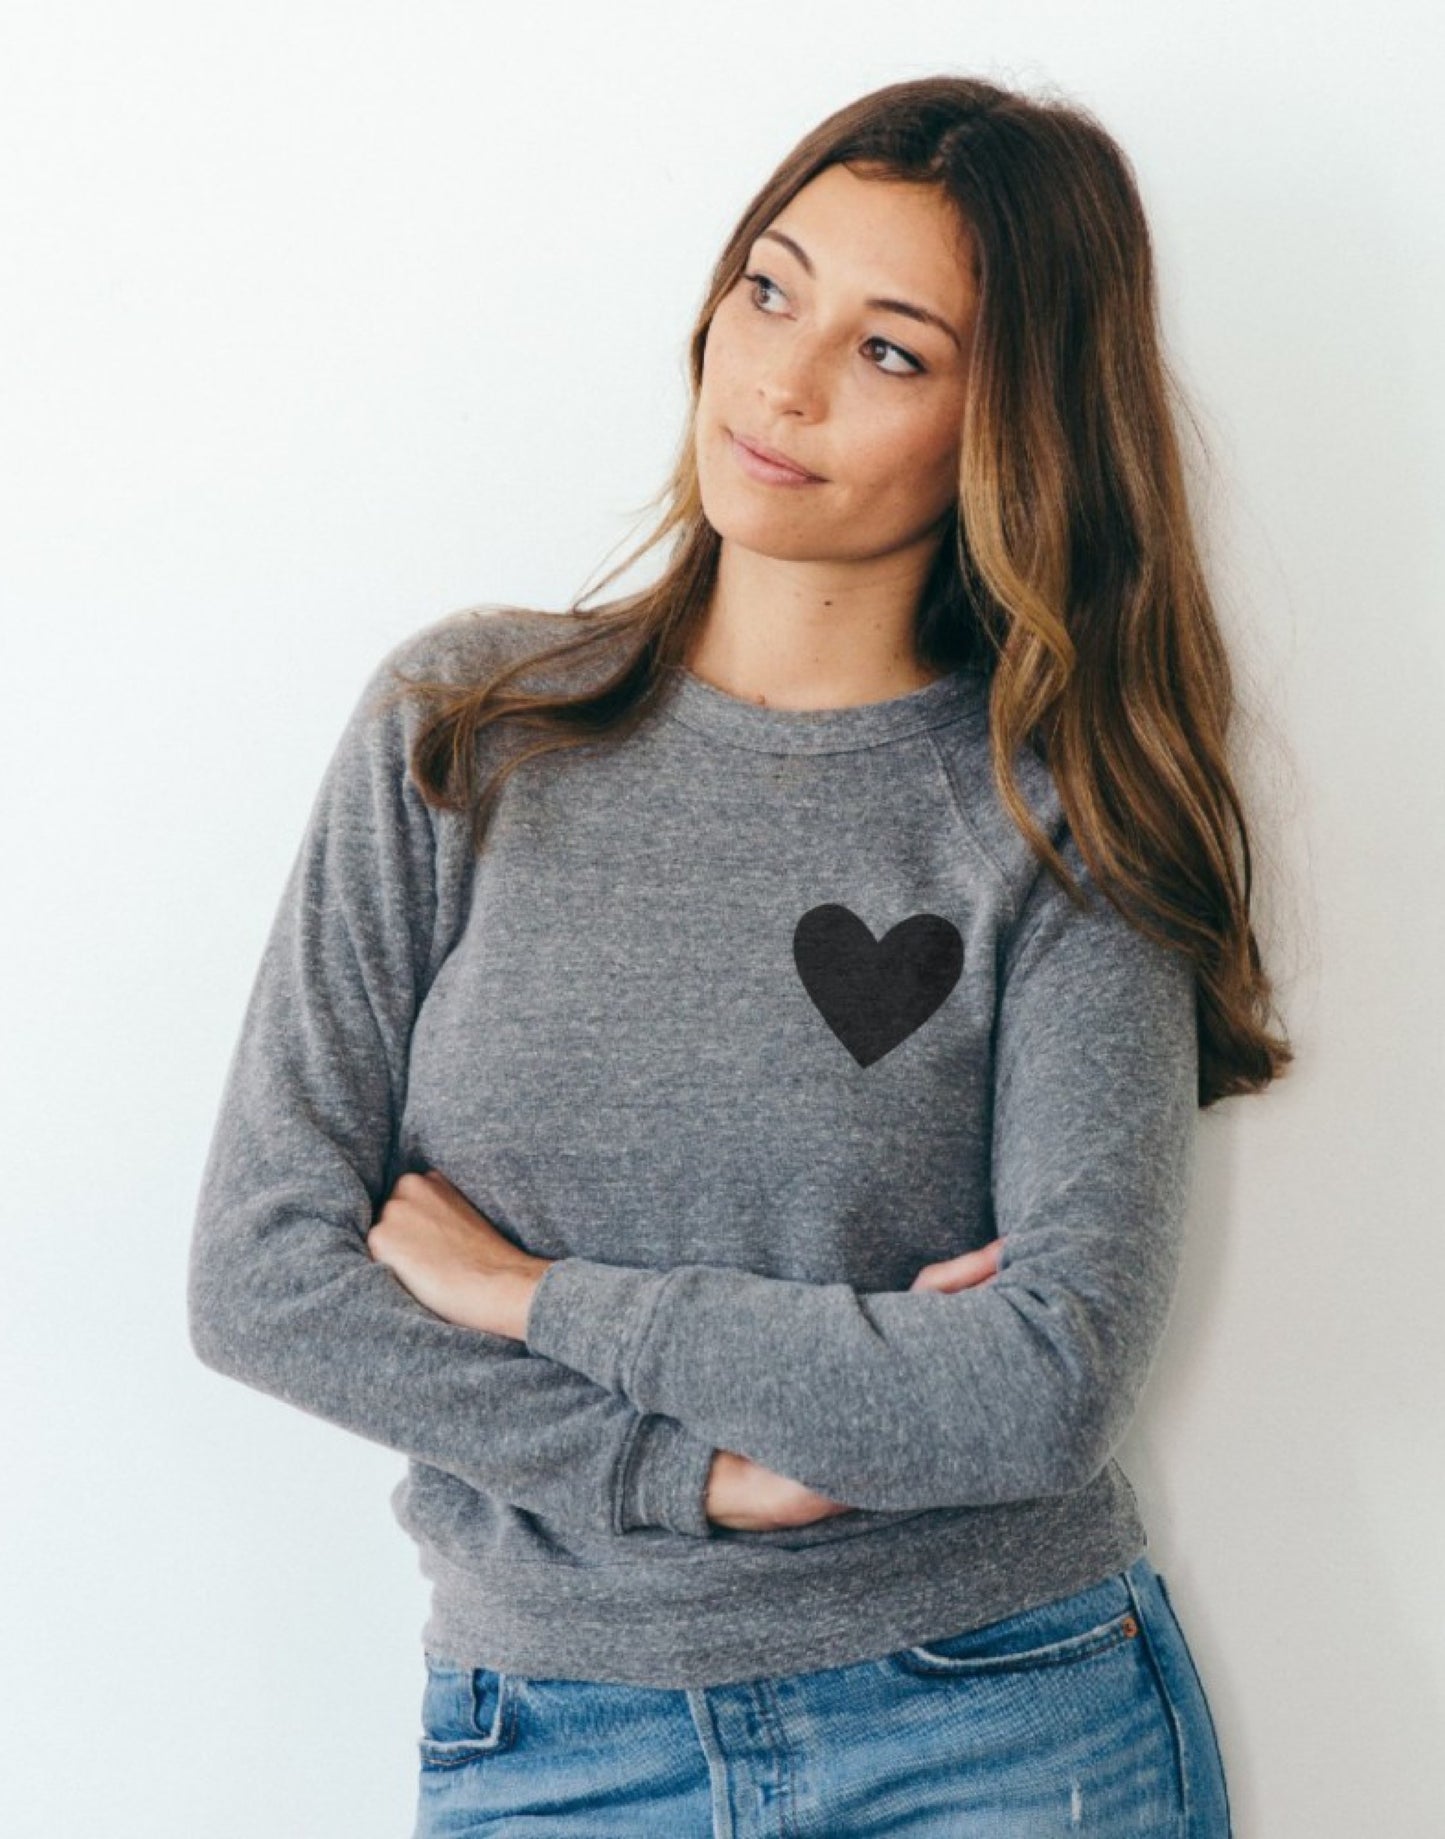 Have a Heart "Pocket" Print Sweater II